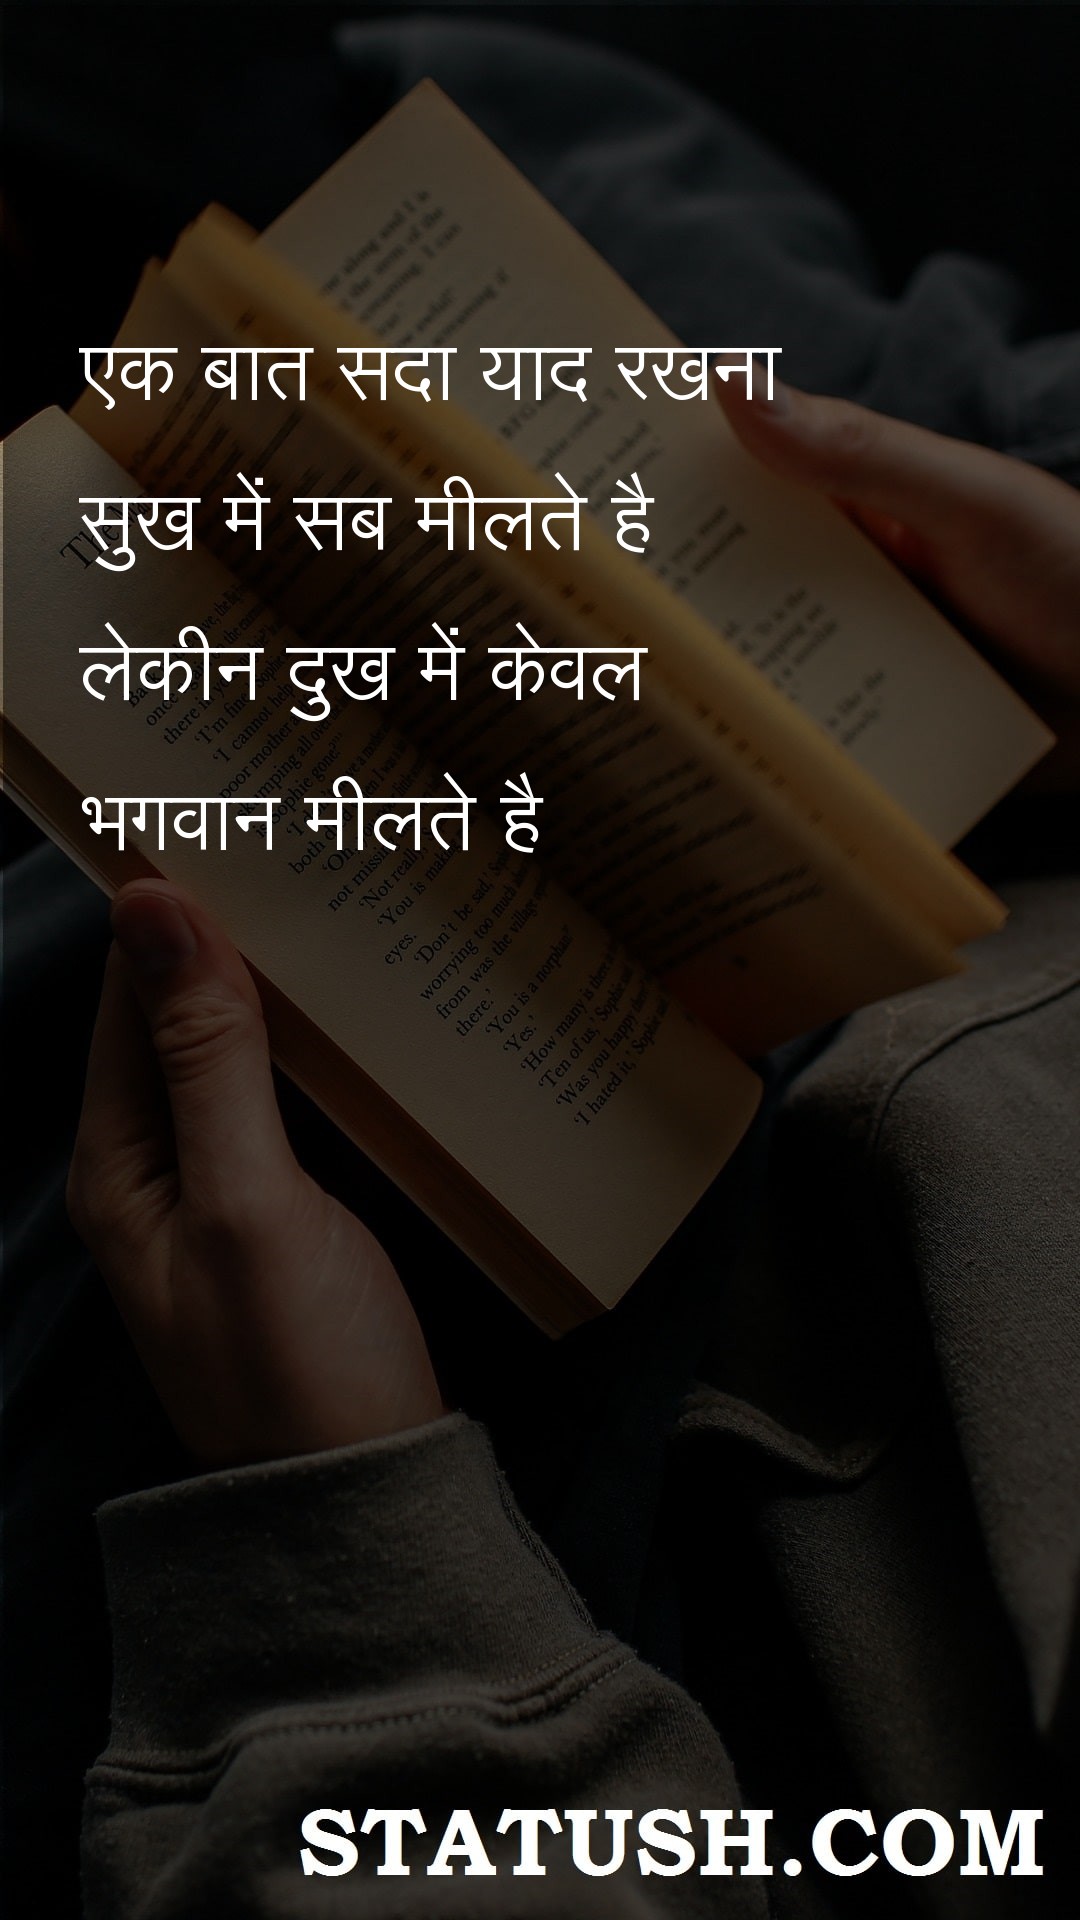 Always remember one thing - Hindi Quotes at statush.com